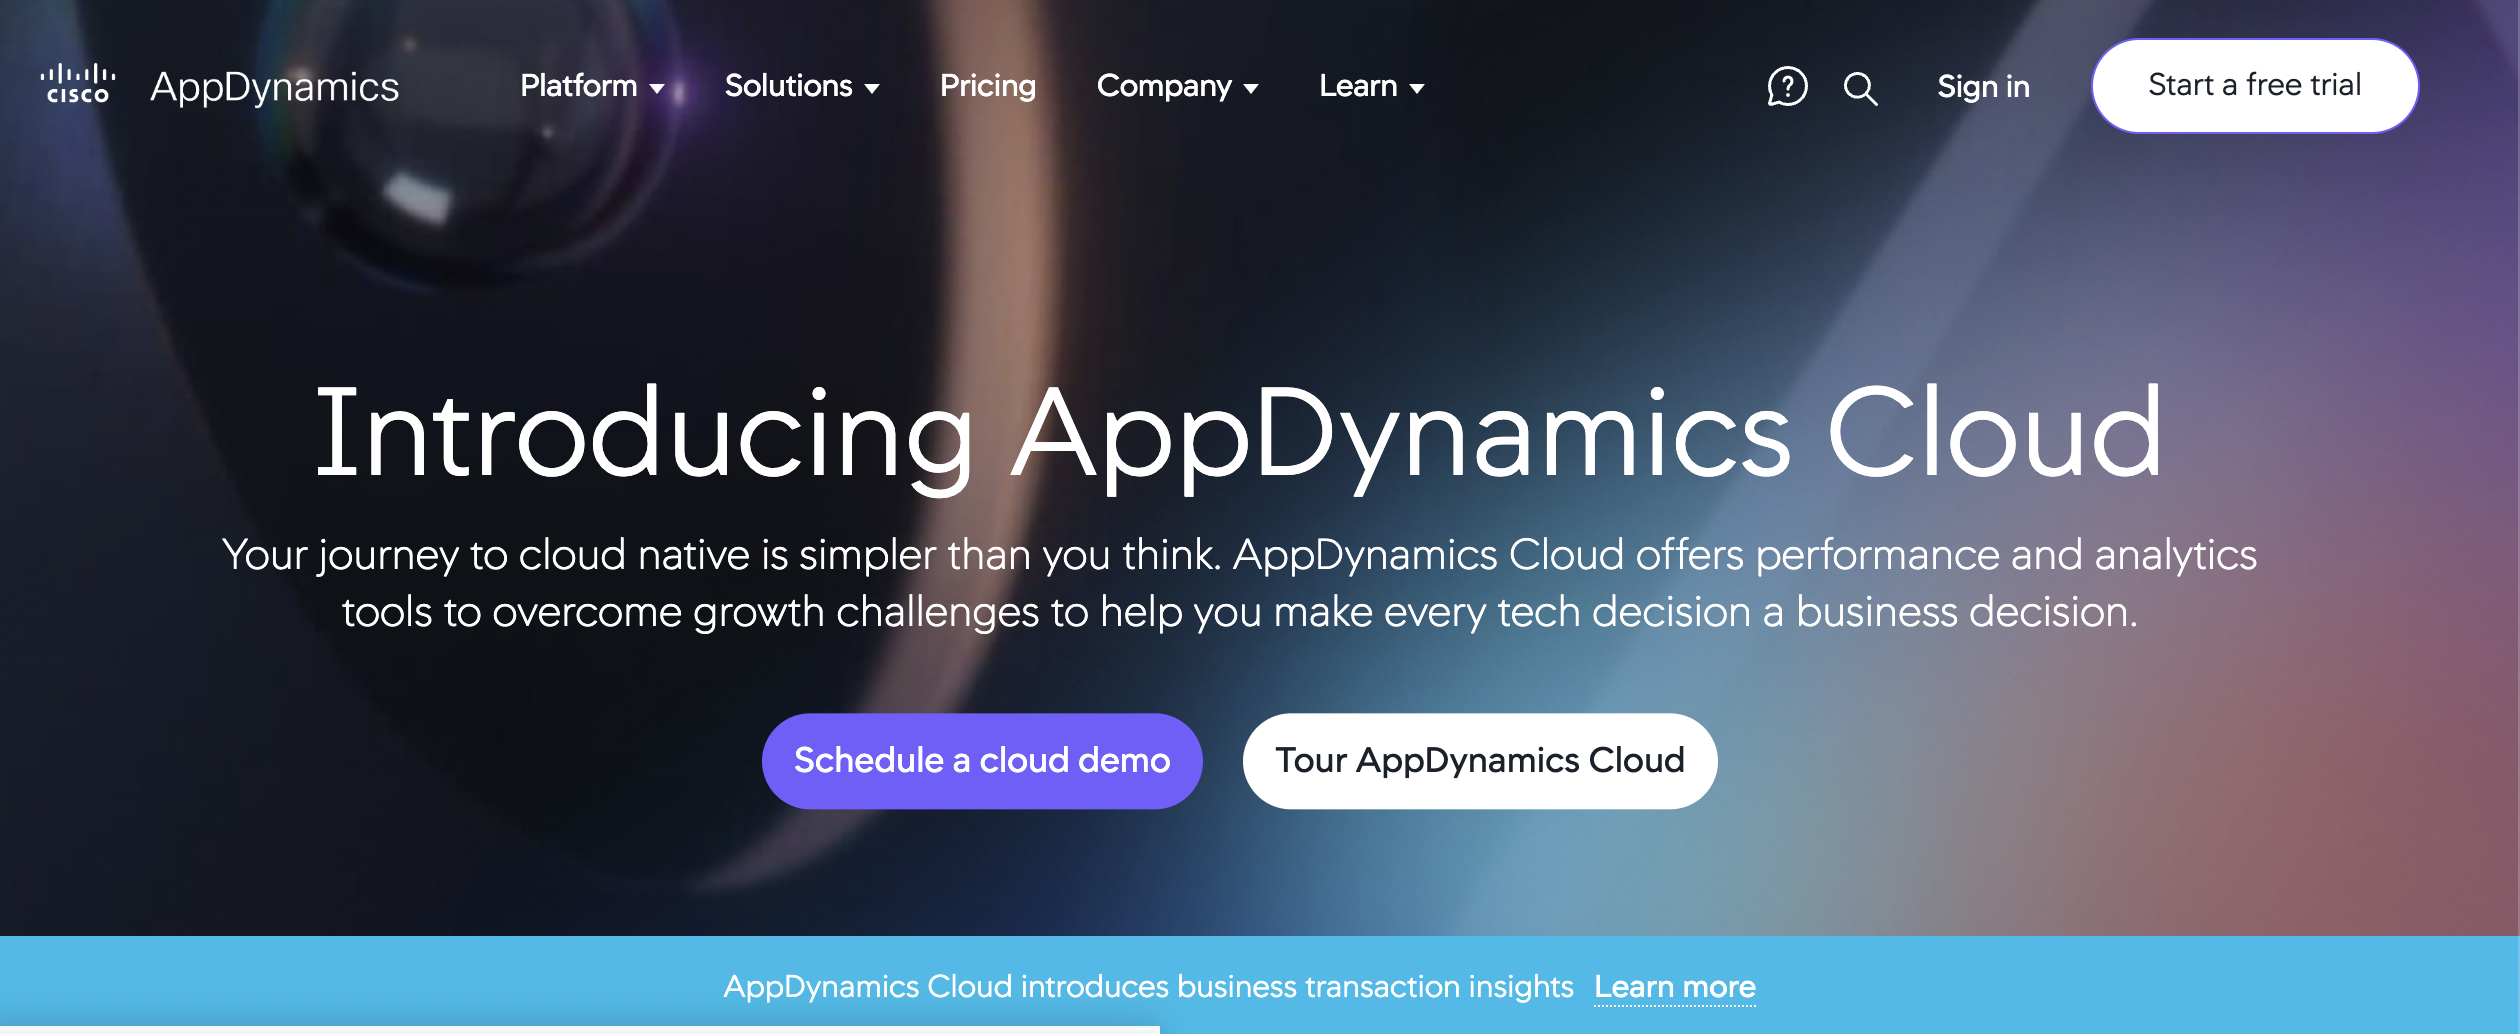 continuous monitoring tools in DevOps - AppDynamics